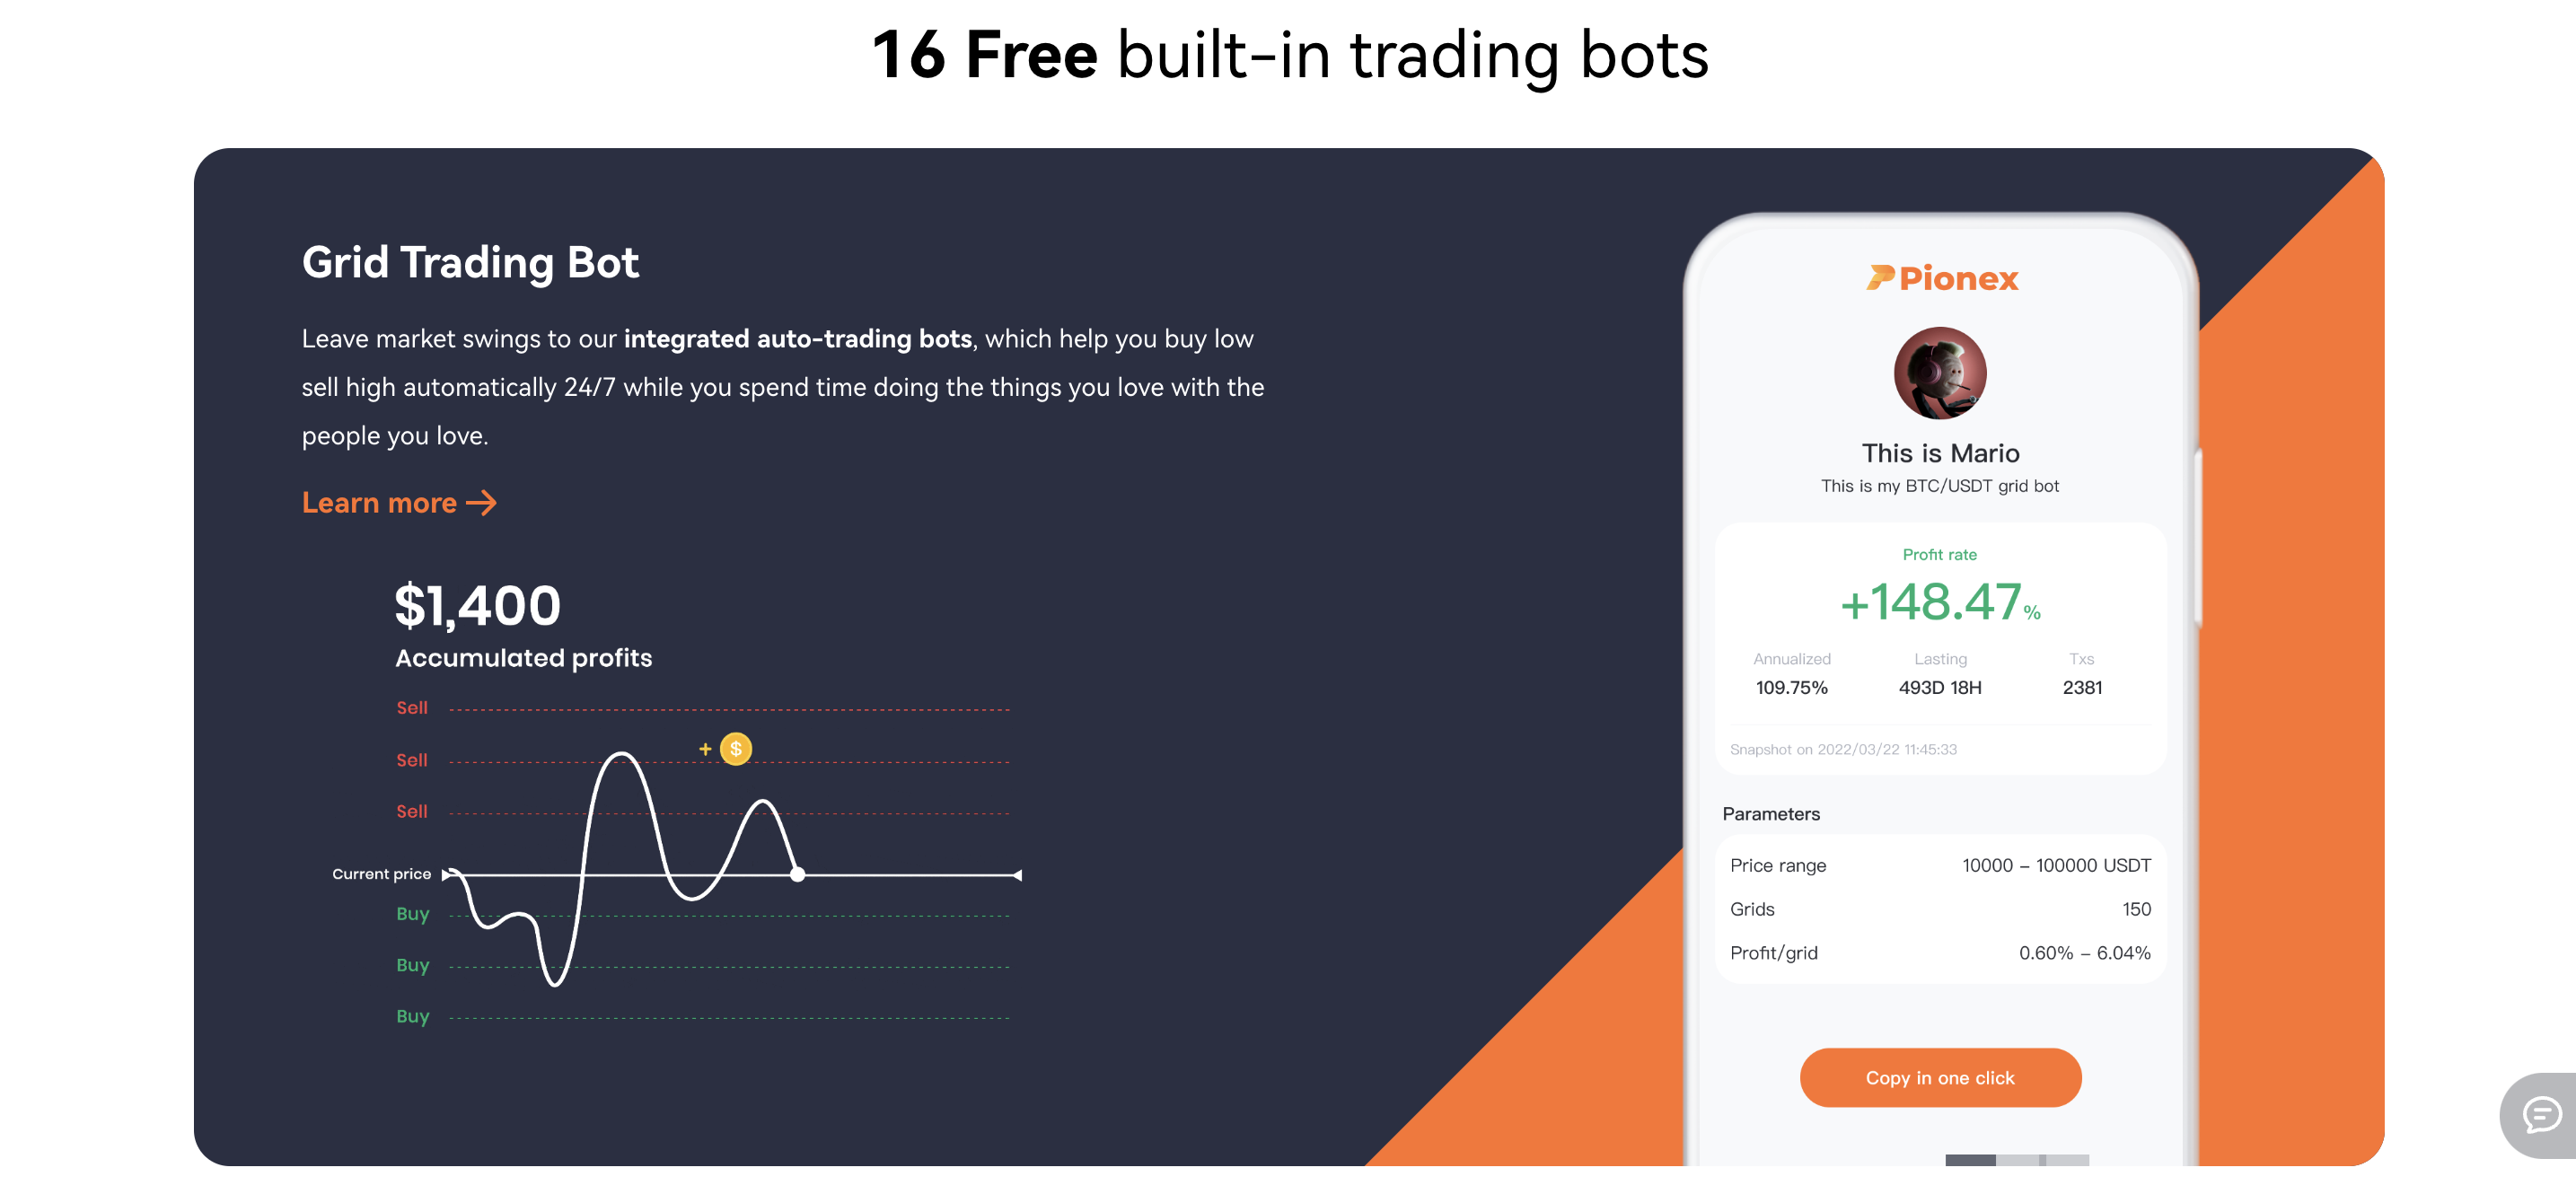 Pionex Trading Bots Section